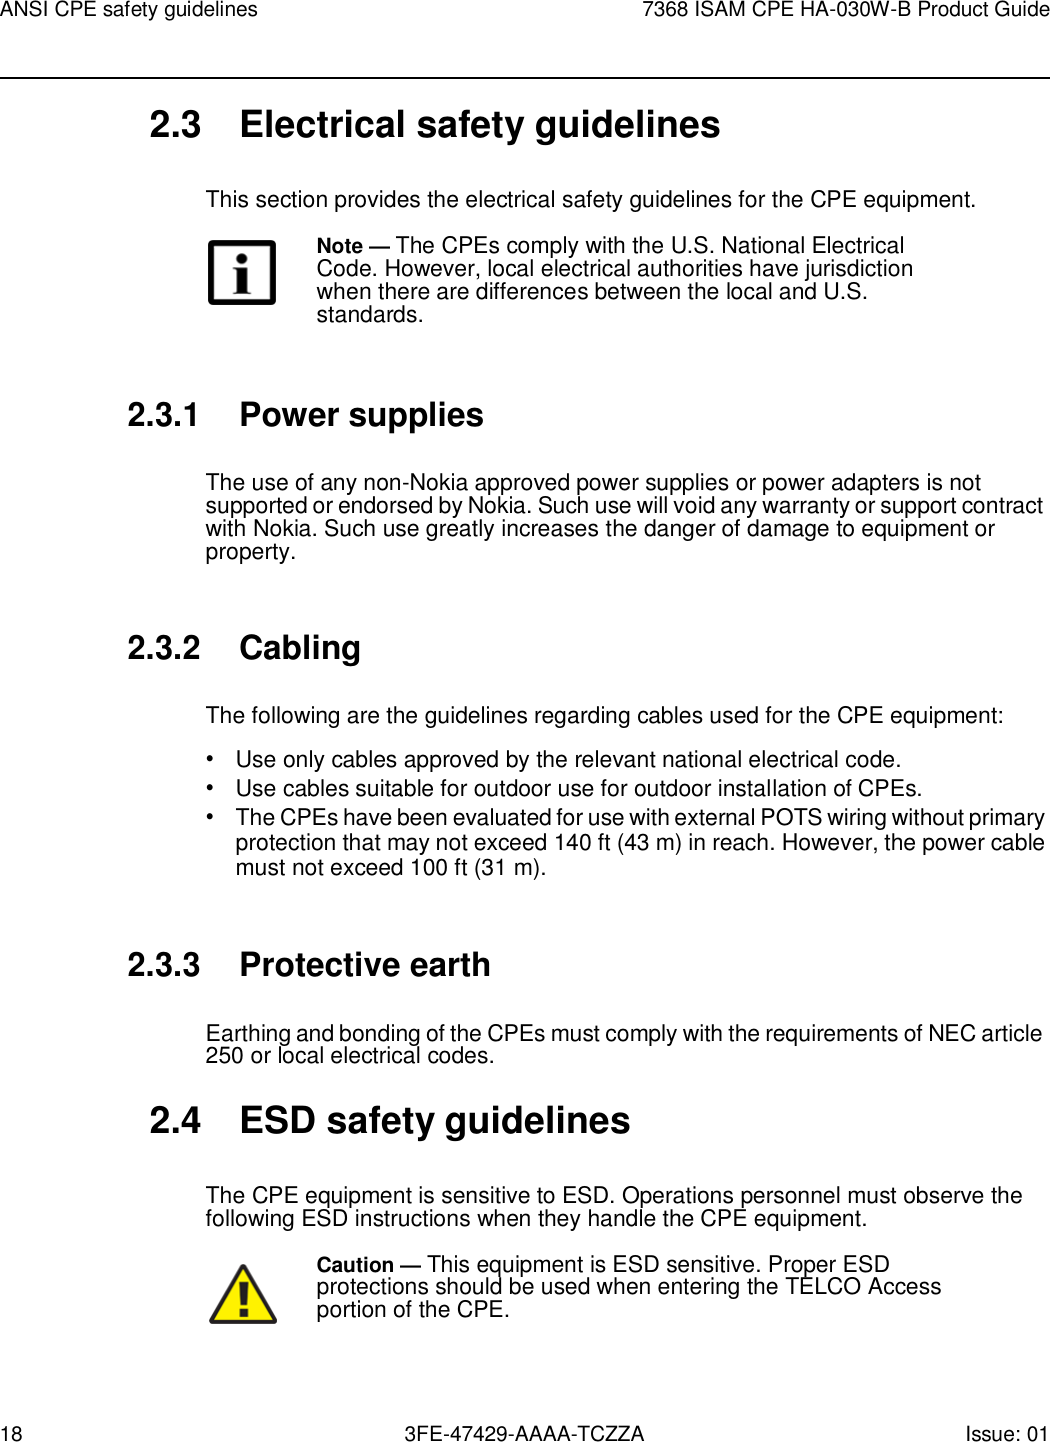 18 3FE-47429-AAAA-TCZZA Issue: 01 ANSI CPE safety guidelines 7368 ISAM CPE HA-030W-B Product Guide    2.3  Electrical safety guidelines  This section provides the electrical safety guidelines for the CPE equipment. Note — The CPEs comply with the U.S. National Electrical Code. However, local electrical authorities have jurisdiction when there are differences between the local and U.S. standards.   2.3.1 Power supplies  The use of any non-Nokia approved power supplies or power adapters is not supported or endorsed by Nokia. Such use will void any warranty or support contract with Nokia. Such use greatly increases the danger of damage to equipment or property.   2.3.2 Cabling  The following are the guidelines regarding cables used for the CPE equipment: • Use only cables approved by the relevant national electrical code. • Use cables suitable for outdoor use for outdoor installation of CPEs. • The CPEs have been evaluated for use with external POTS wiring without primary protection that may not exceed 140 ft (43 m) in reach. However, the power cable must not exceed 100 ft (31 m).   2.3.3 Protective earth  Earthing and bonding of the CPEs must comply with the requirements of NEC article 250 or local electrical codes.  2.4  ESD safety guidelines  The CPE equipment is sensitive to ESD. Operations personnel must observe the following ESD instructions when they handle the CPE equipment.  Caution — This equipment is ESD sensitive. Proper ESD protections should be used when entering the TELCO Access portion of the CPE. 